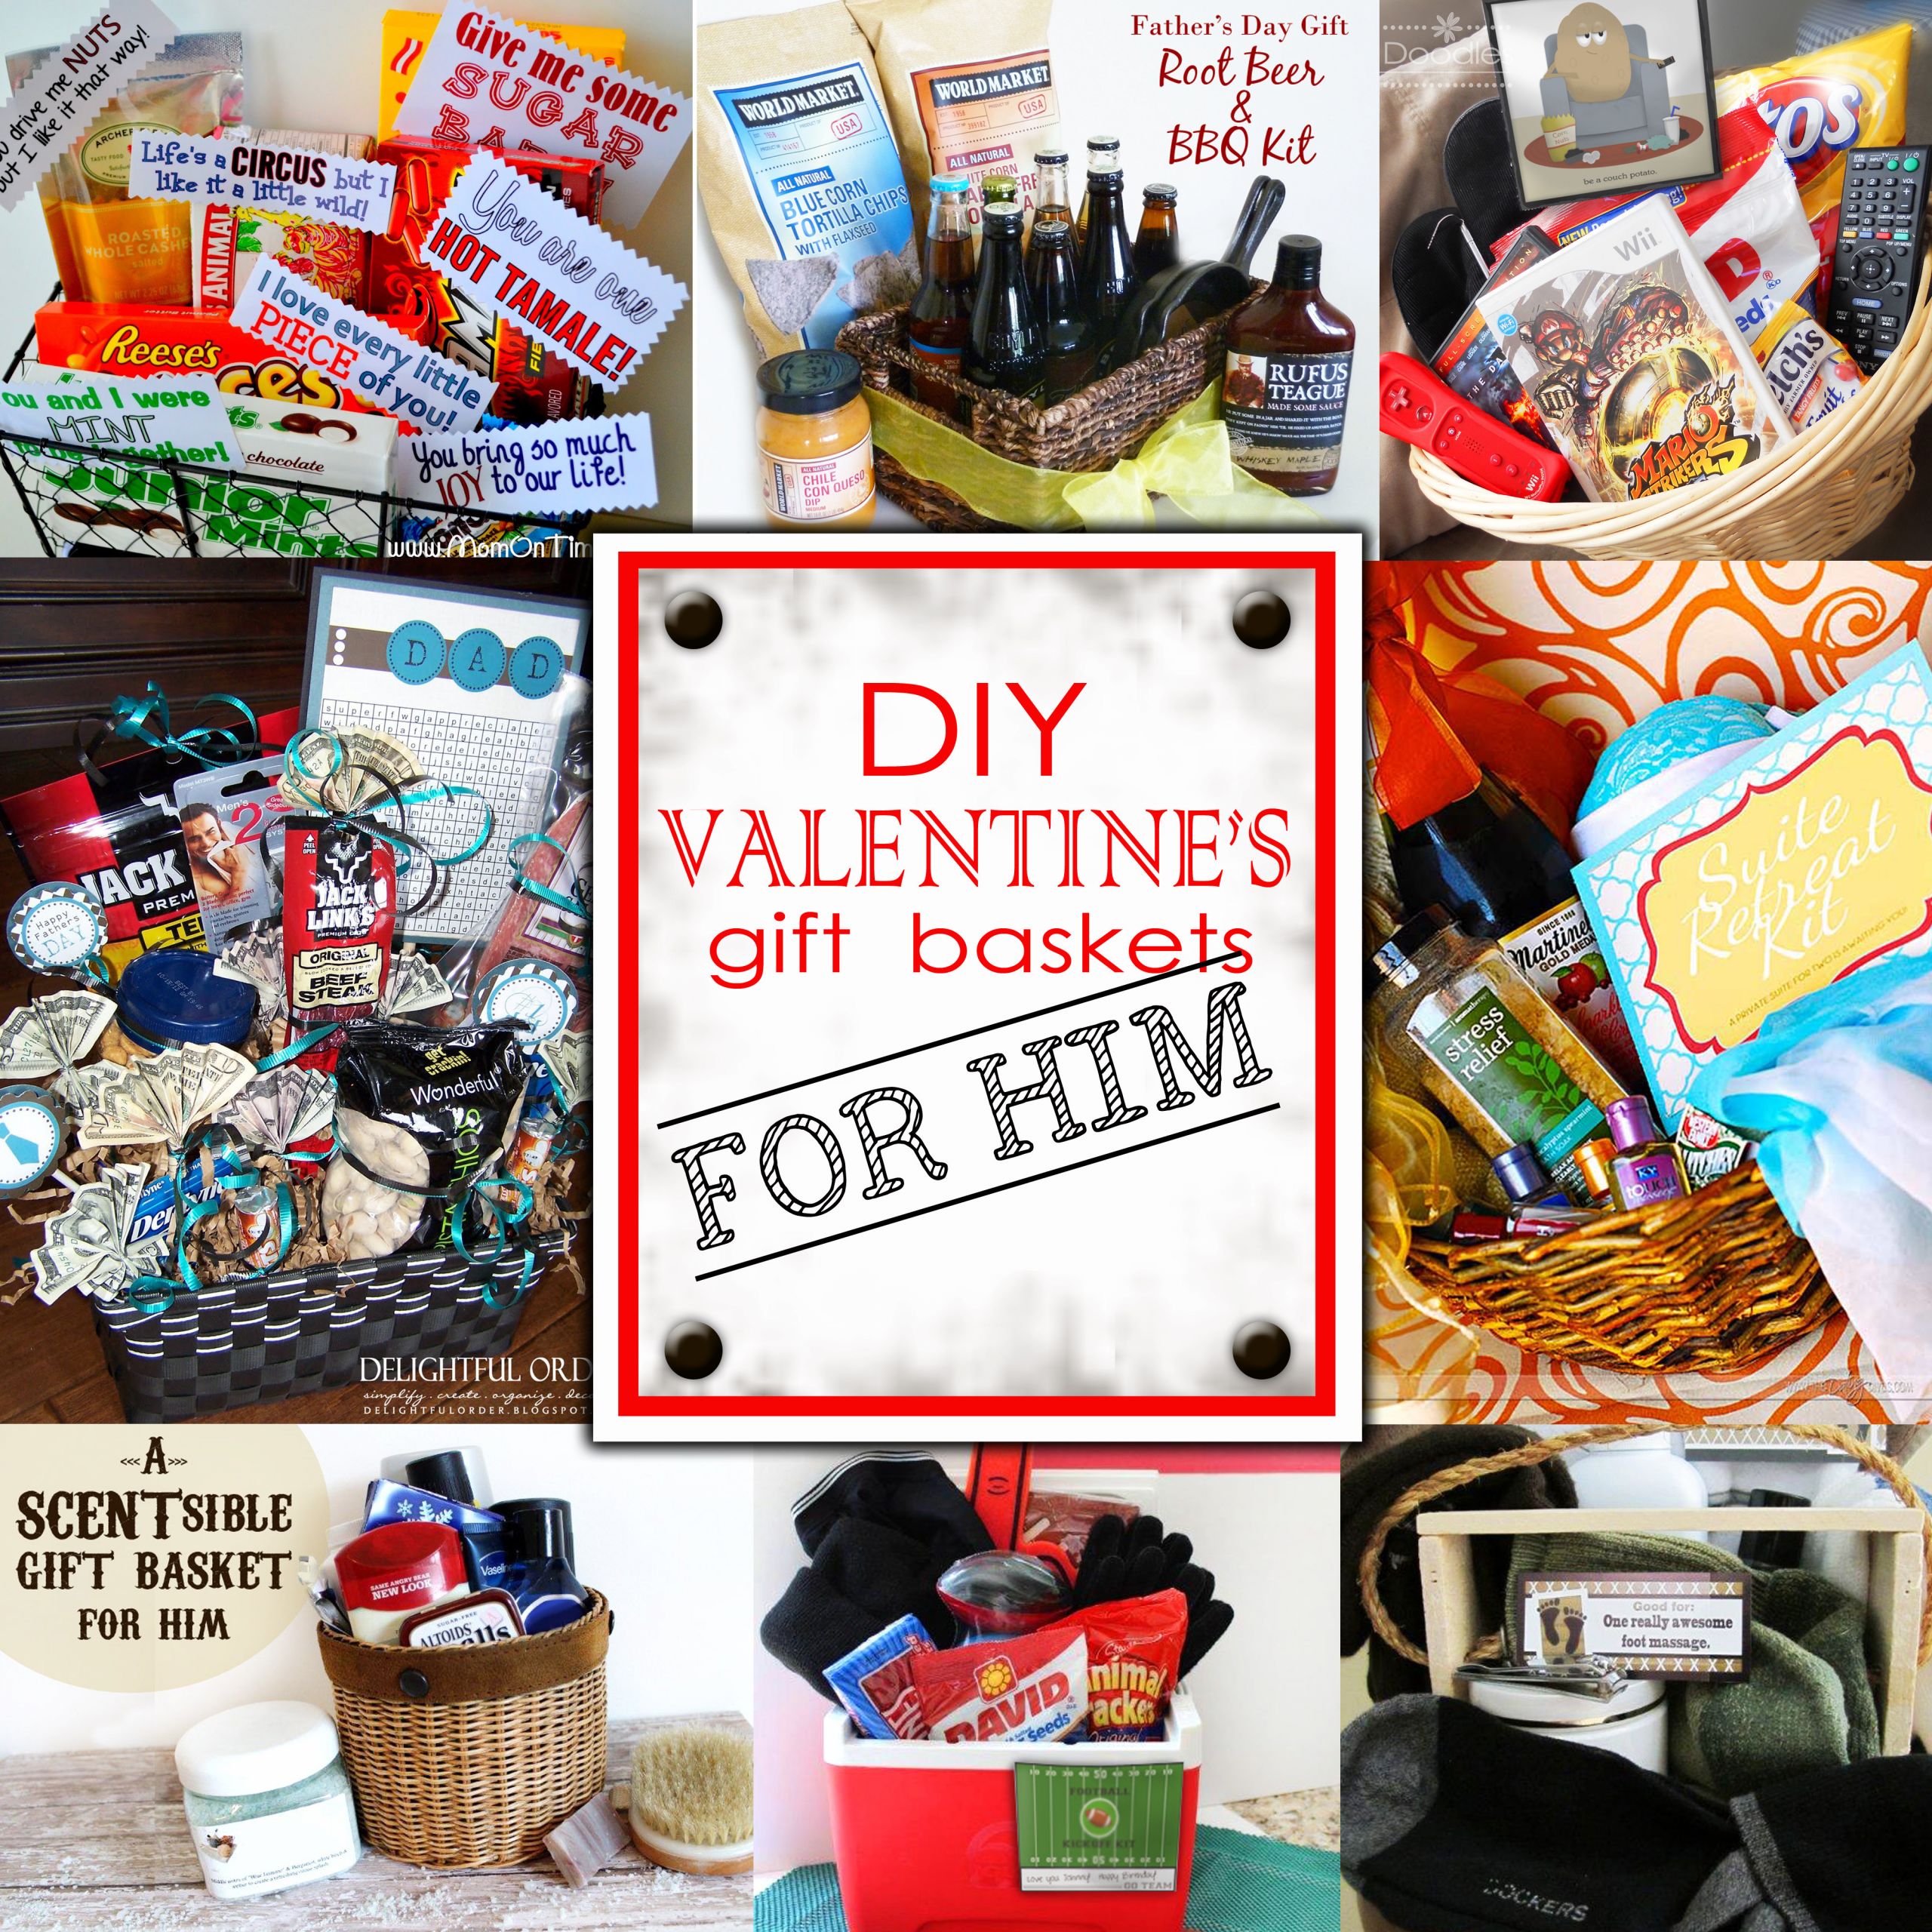 Valentines Day Gift Ideas for Him Inspirational Diy Valentine S Day Gift Baskets for Him Darling Doodles